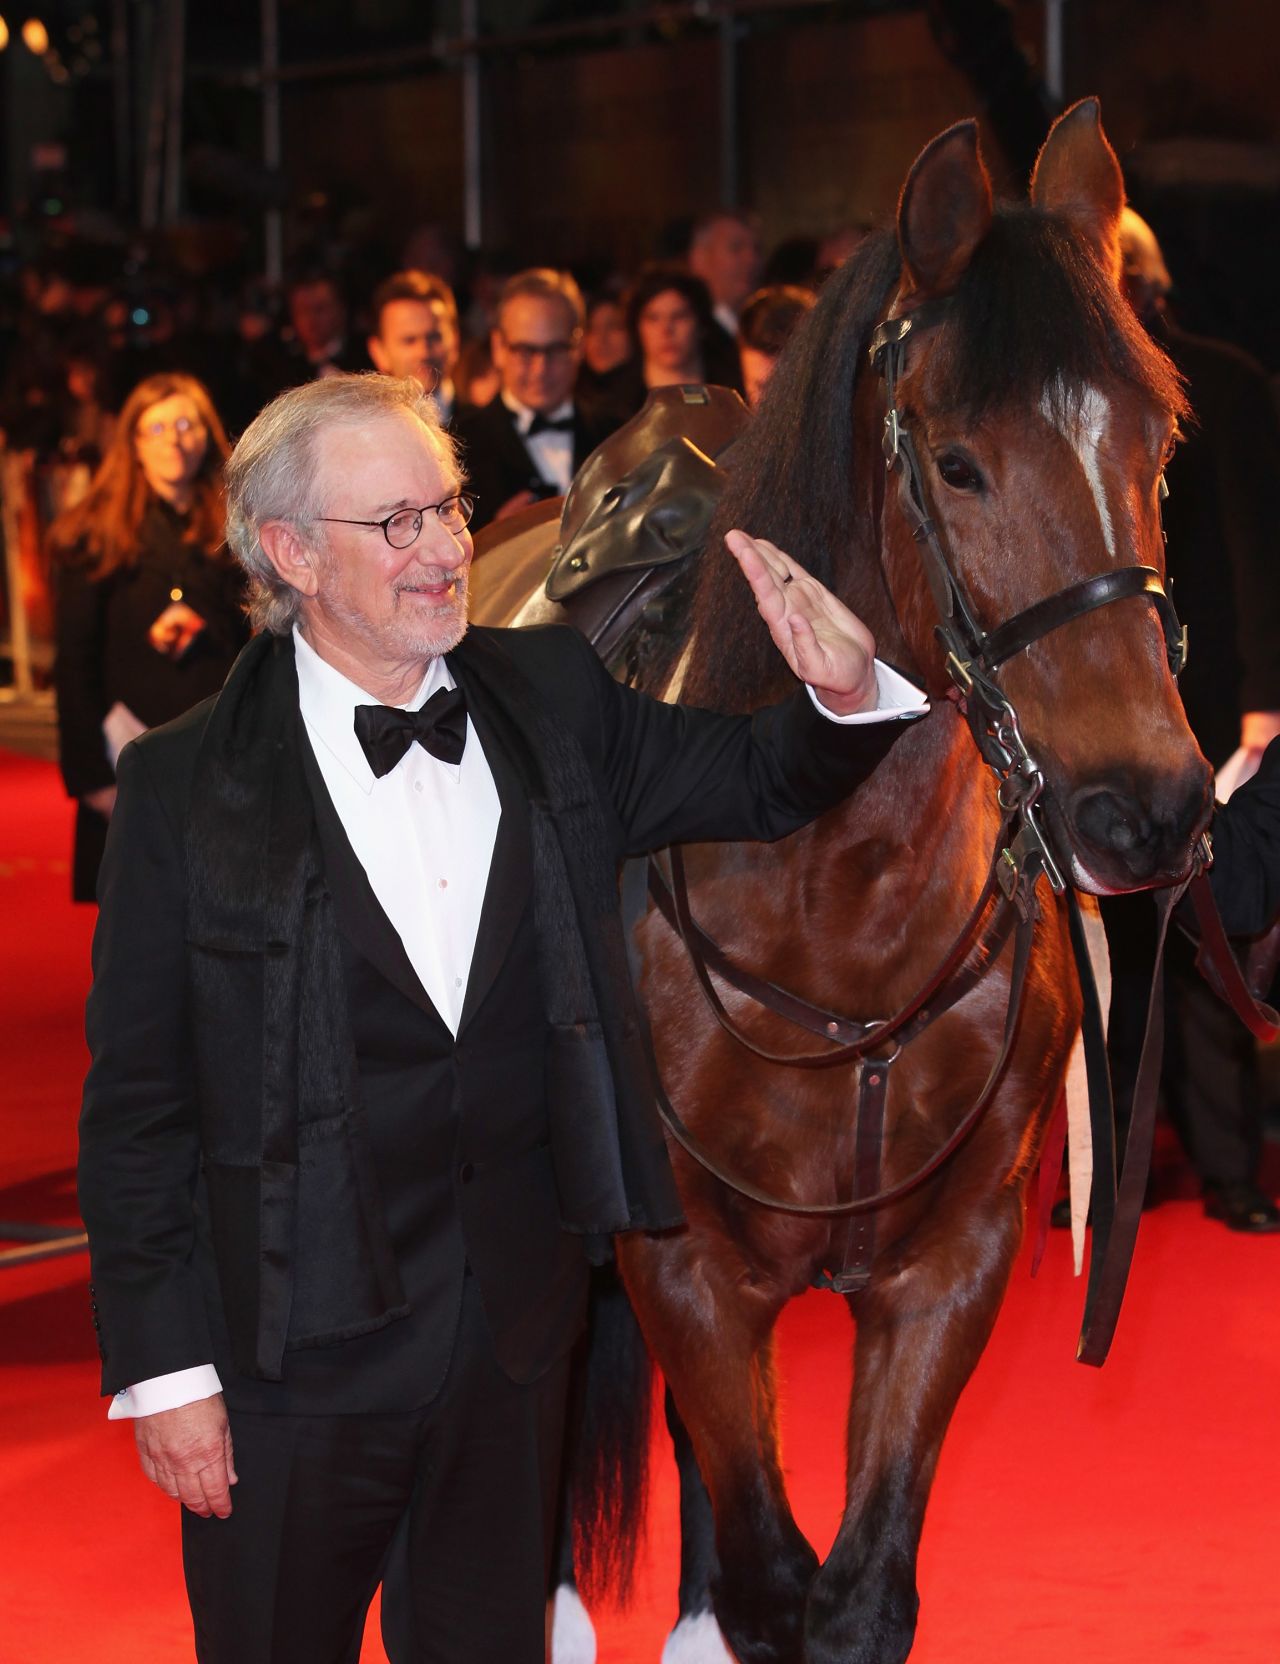 Oscar-winning director Steven Spielberg's interest in horses does not stop at the movie set. He co-owned racehorse Atswhatimtalkingabout, which came fourth in the 2003 Kentucky Derby. He is also an investor in Biscuit Stables, the Delaware-based race trainers.